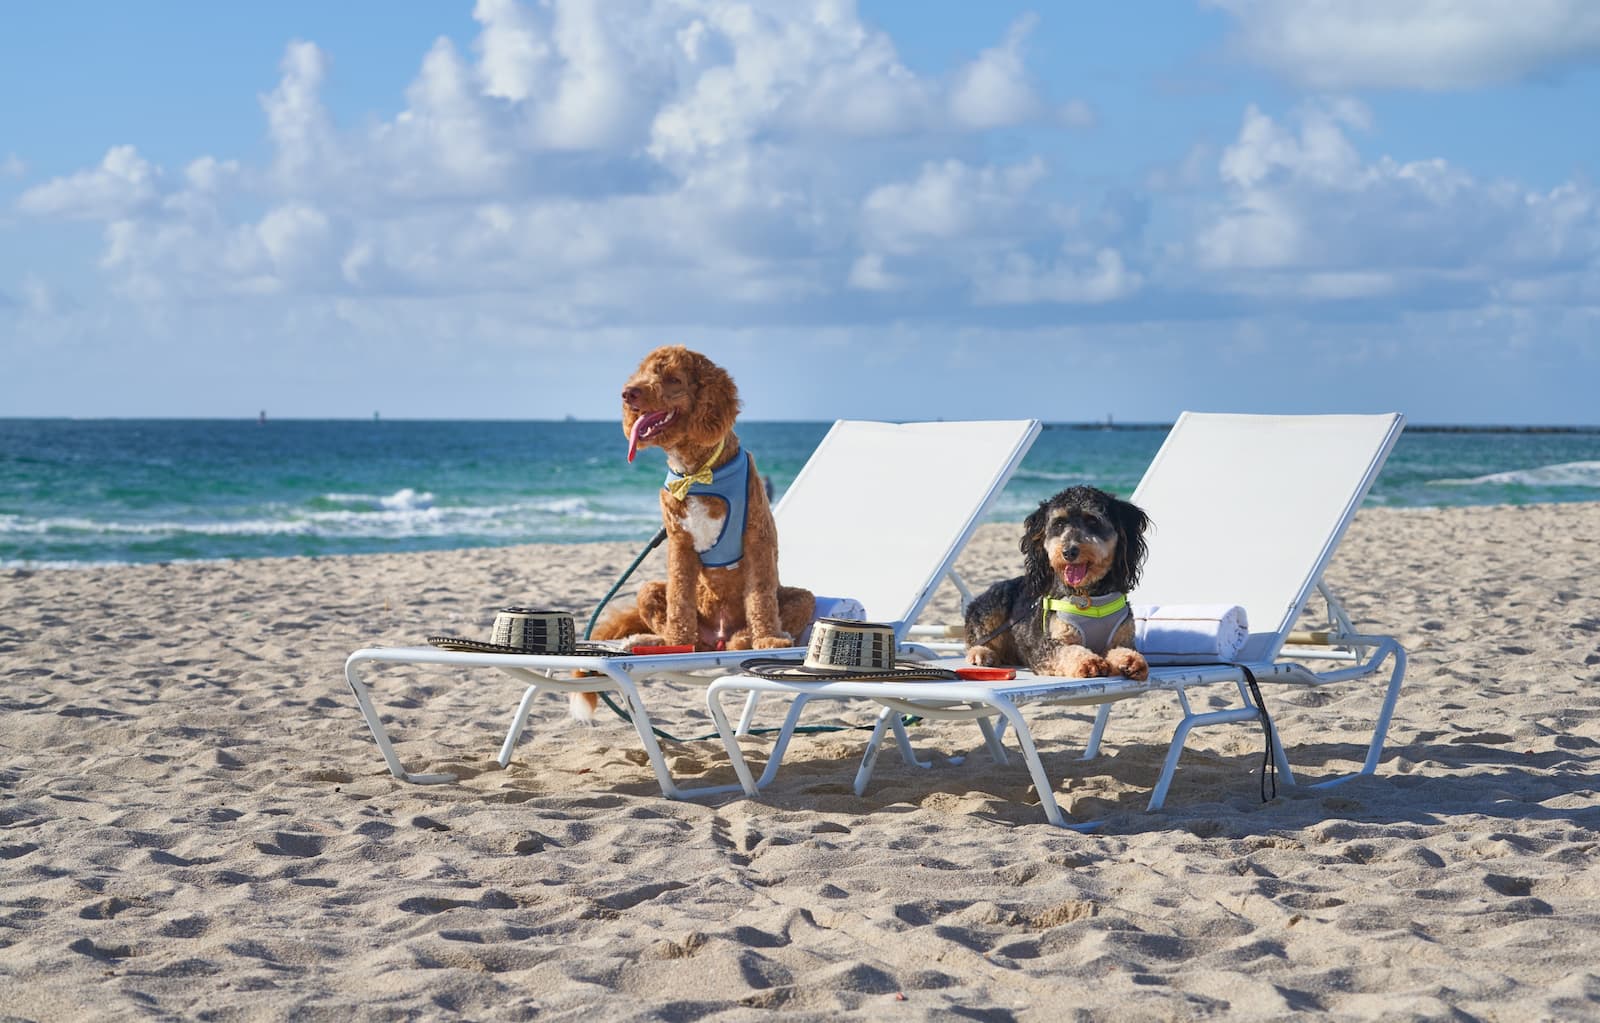 Pet Friendly Hotels In Miami Making